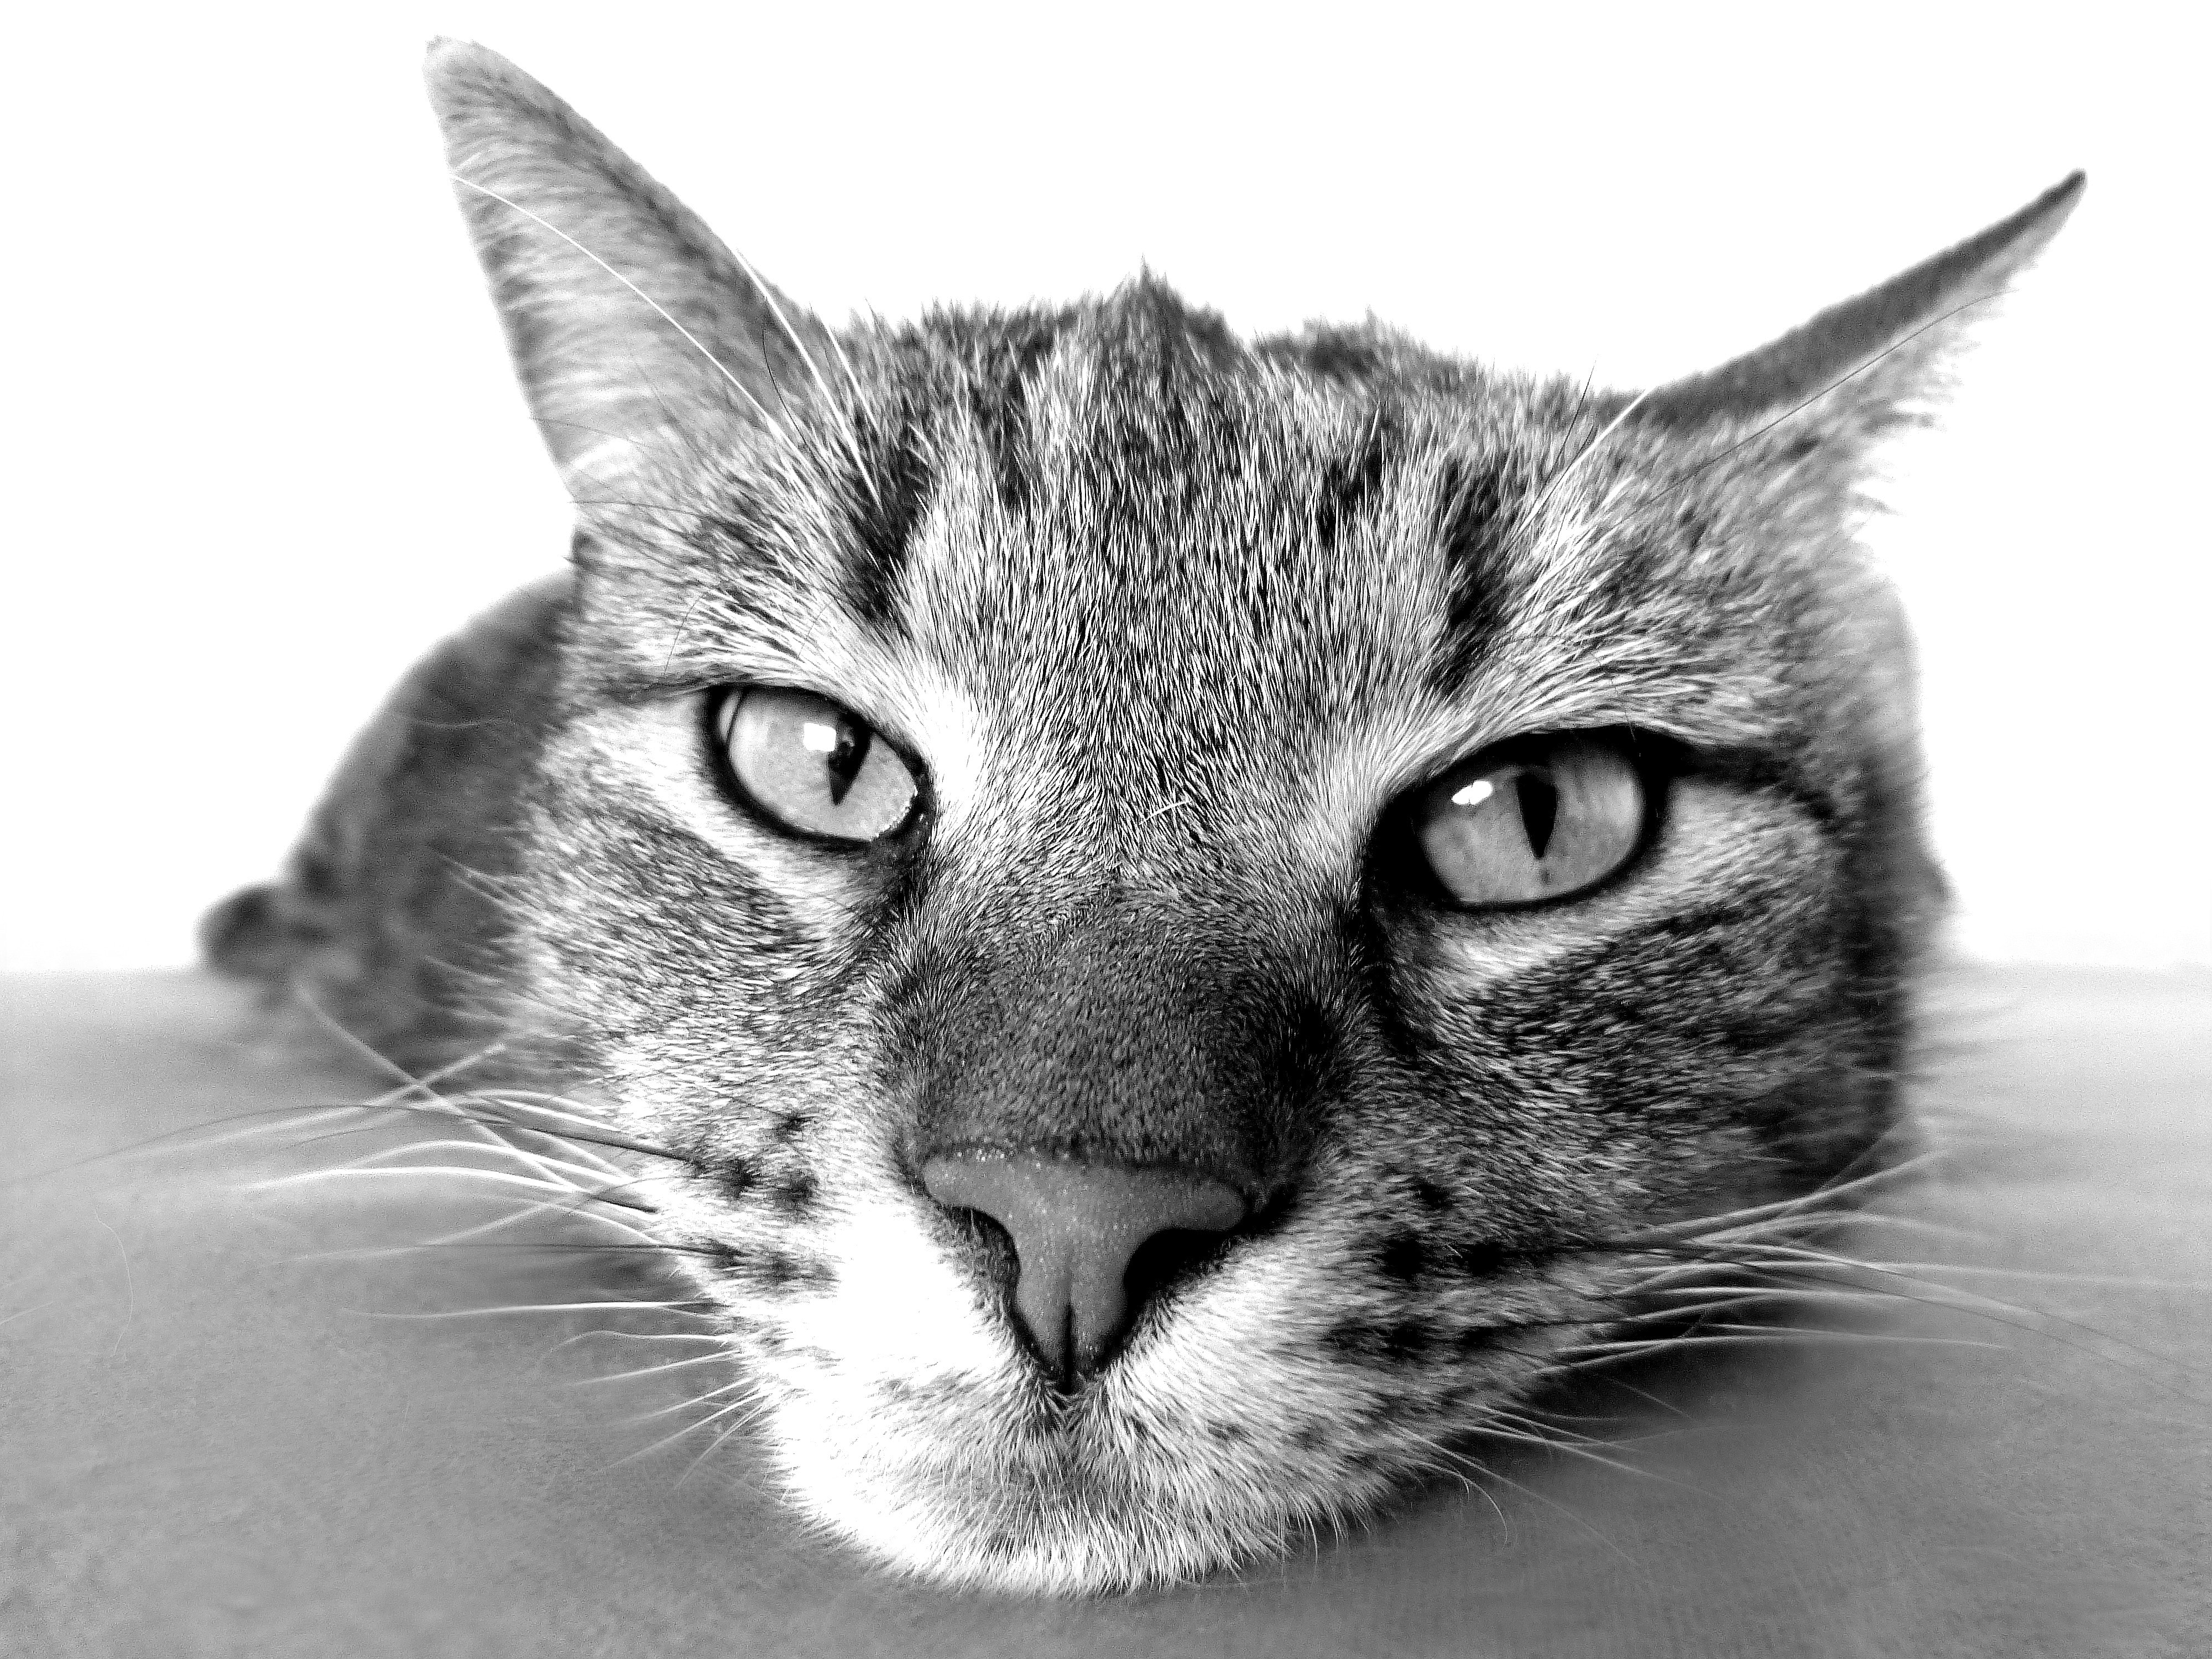 Grayscale photography of cat